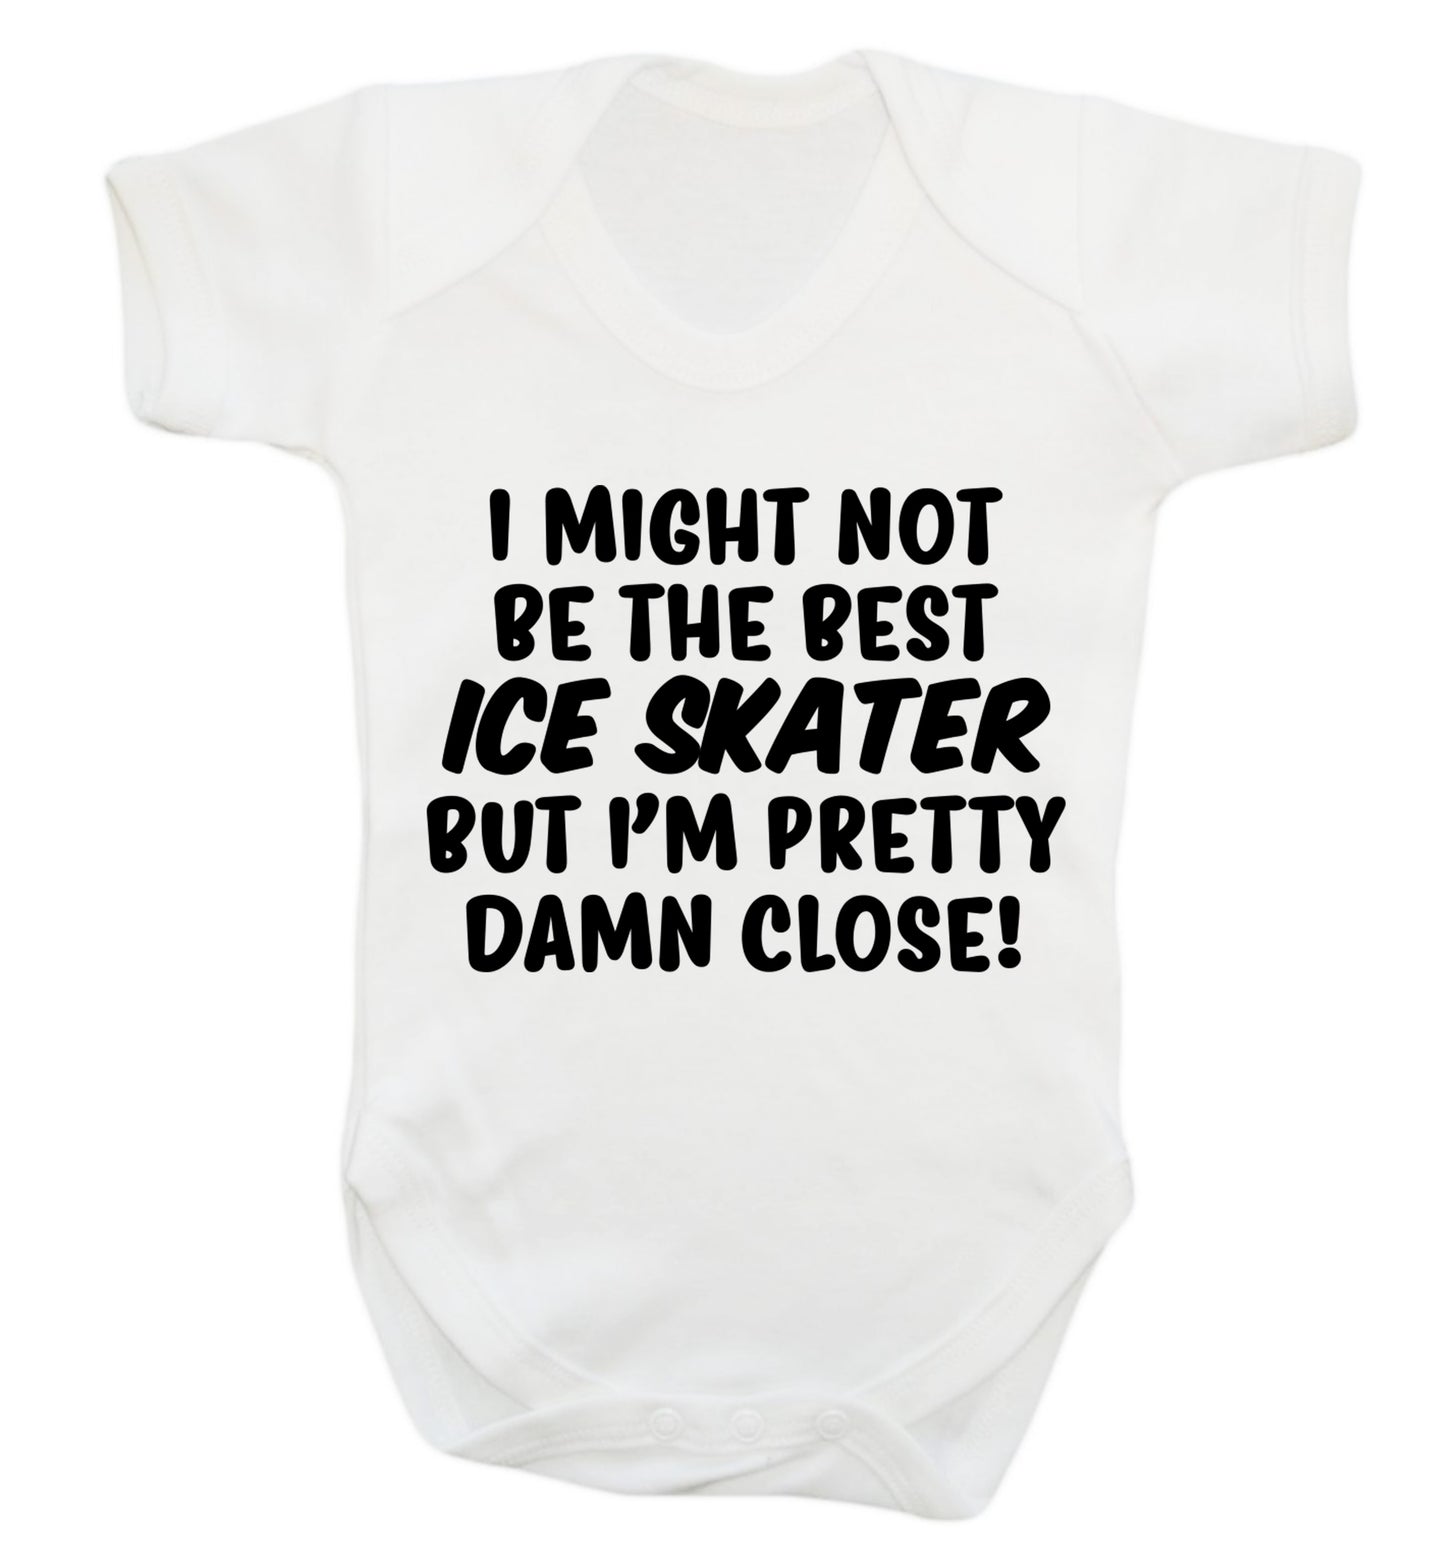 I might not be the best ice skater but I'm pretty damn close! Baby Vest white 18-24 months